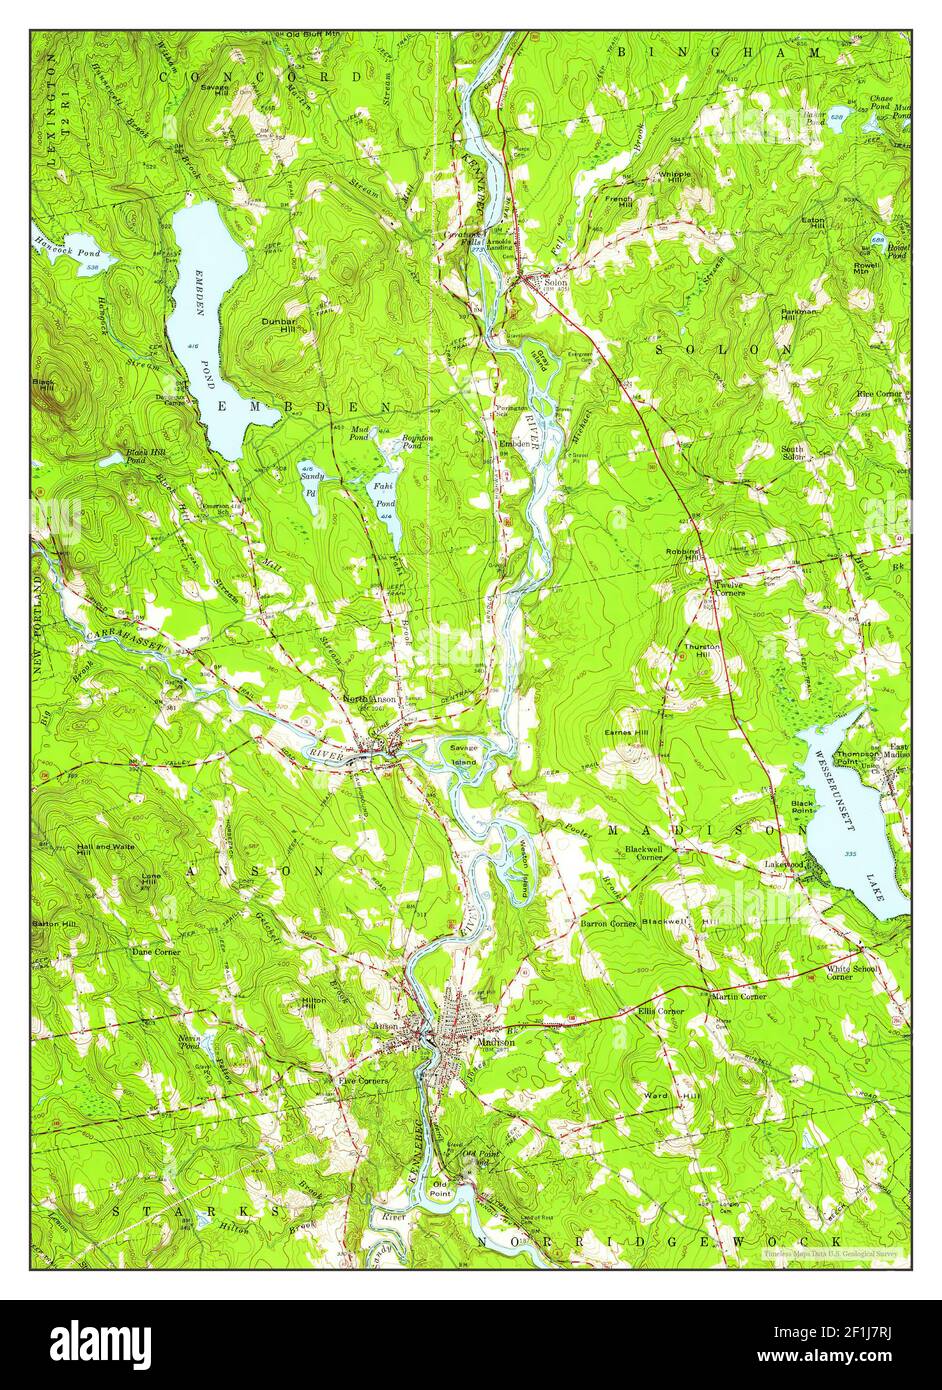 Anson, Maine, map 1955, 1:62500, United States of America by Timeless Maps,  data U.S. Geological Survey Stock Photo - Alamy